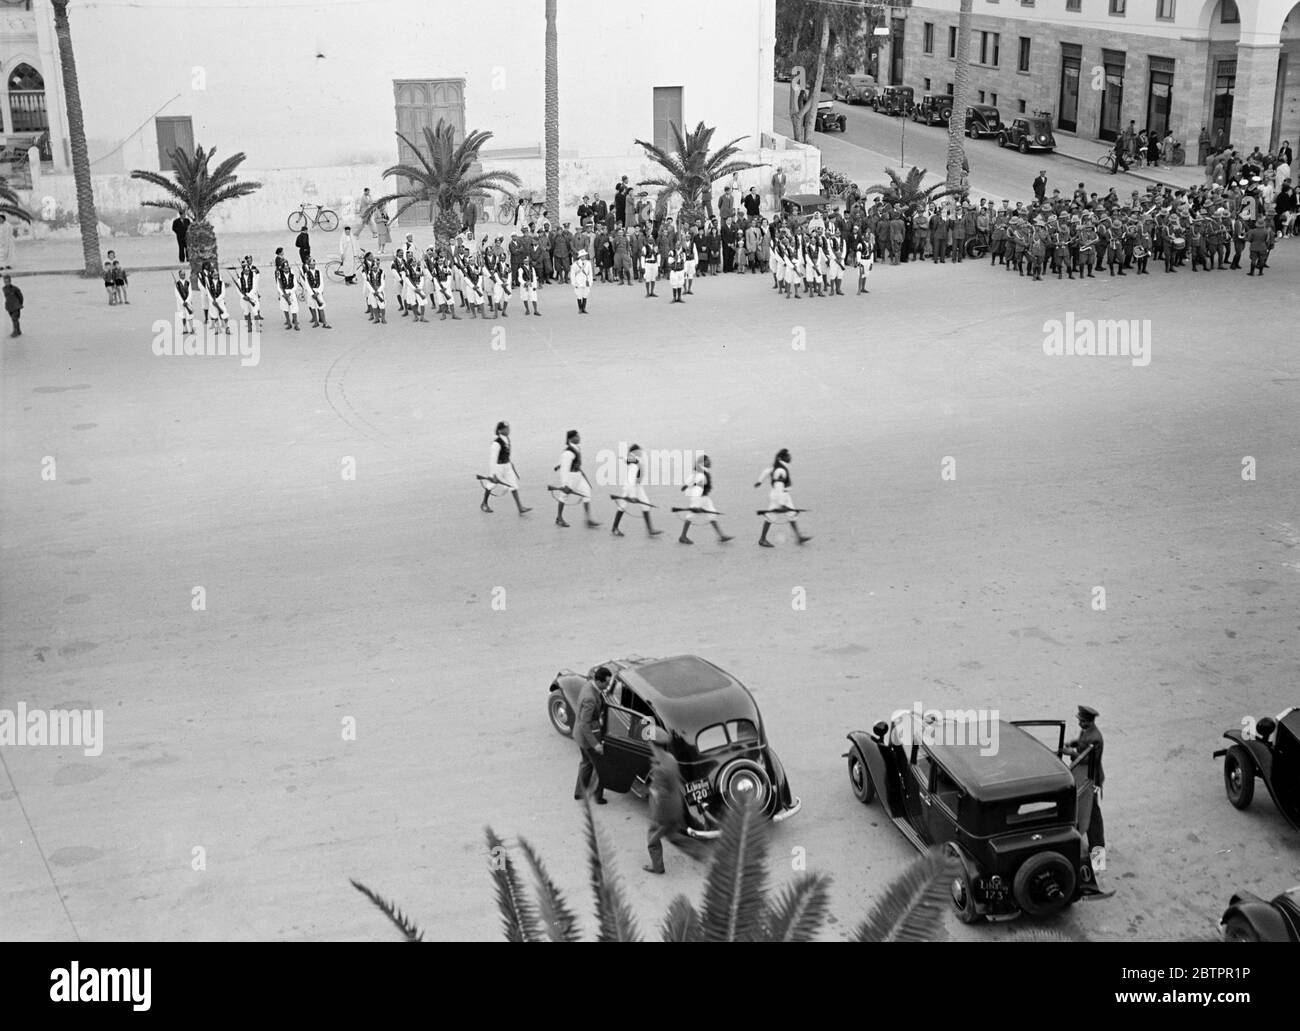 Tripoli. Troops on parade in traditional uniform. Stock Photo